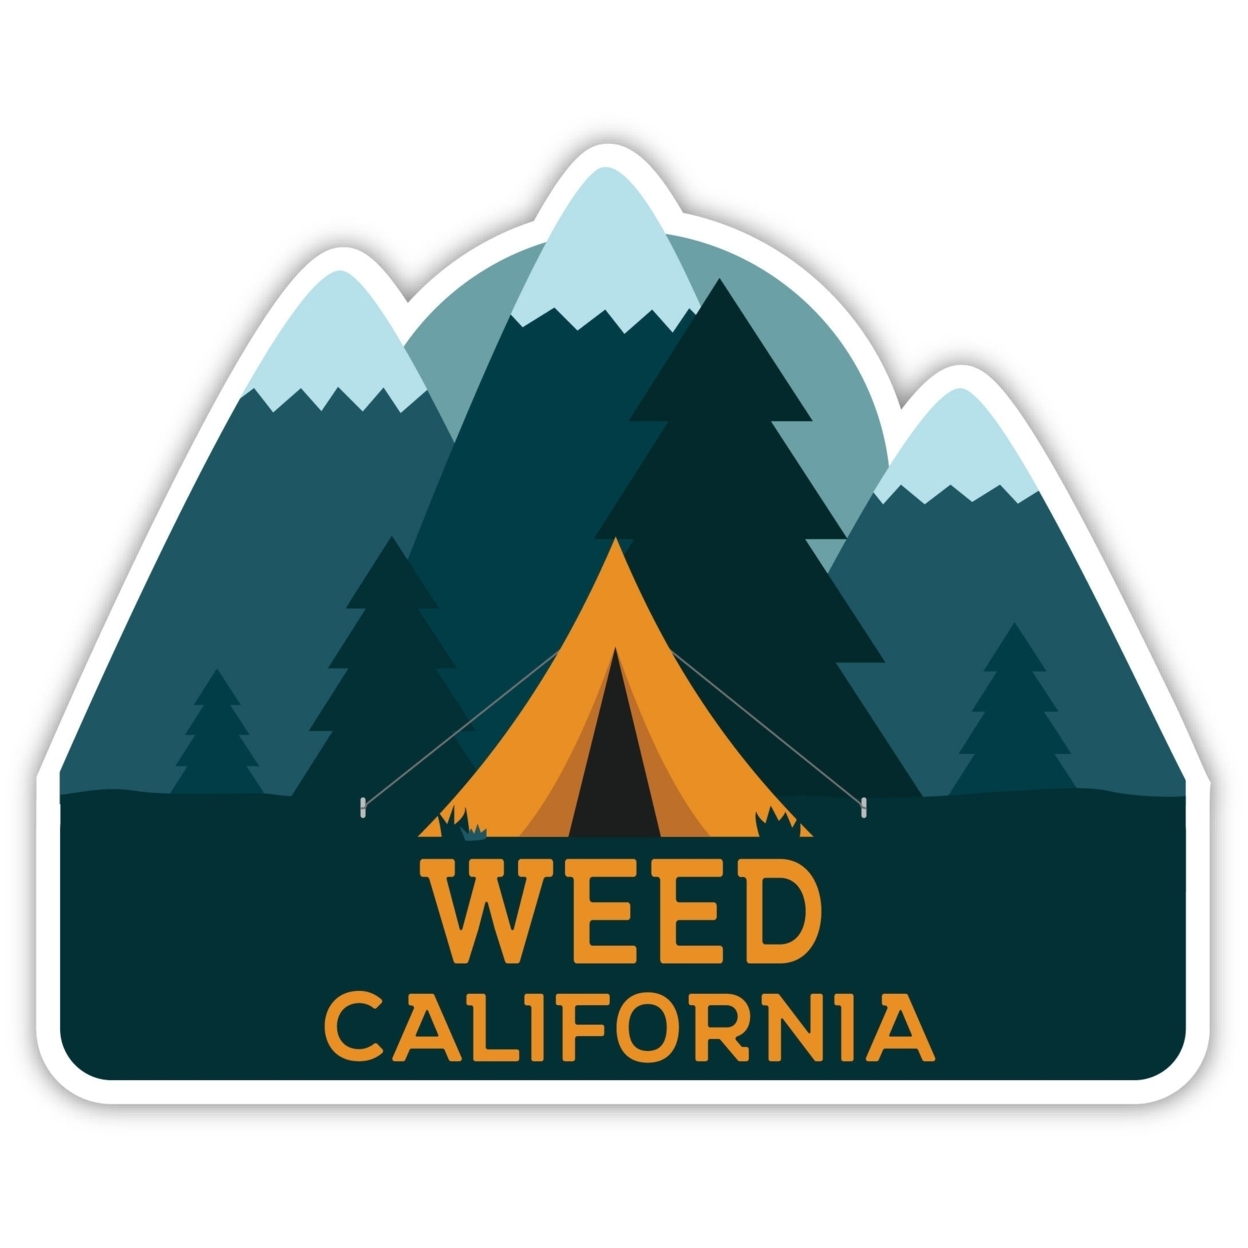 Weed California Souvenir Decorative Stickers (Choose Theme And Size) - Single Unit, 4-Inch, Camp Life